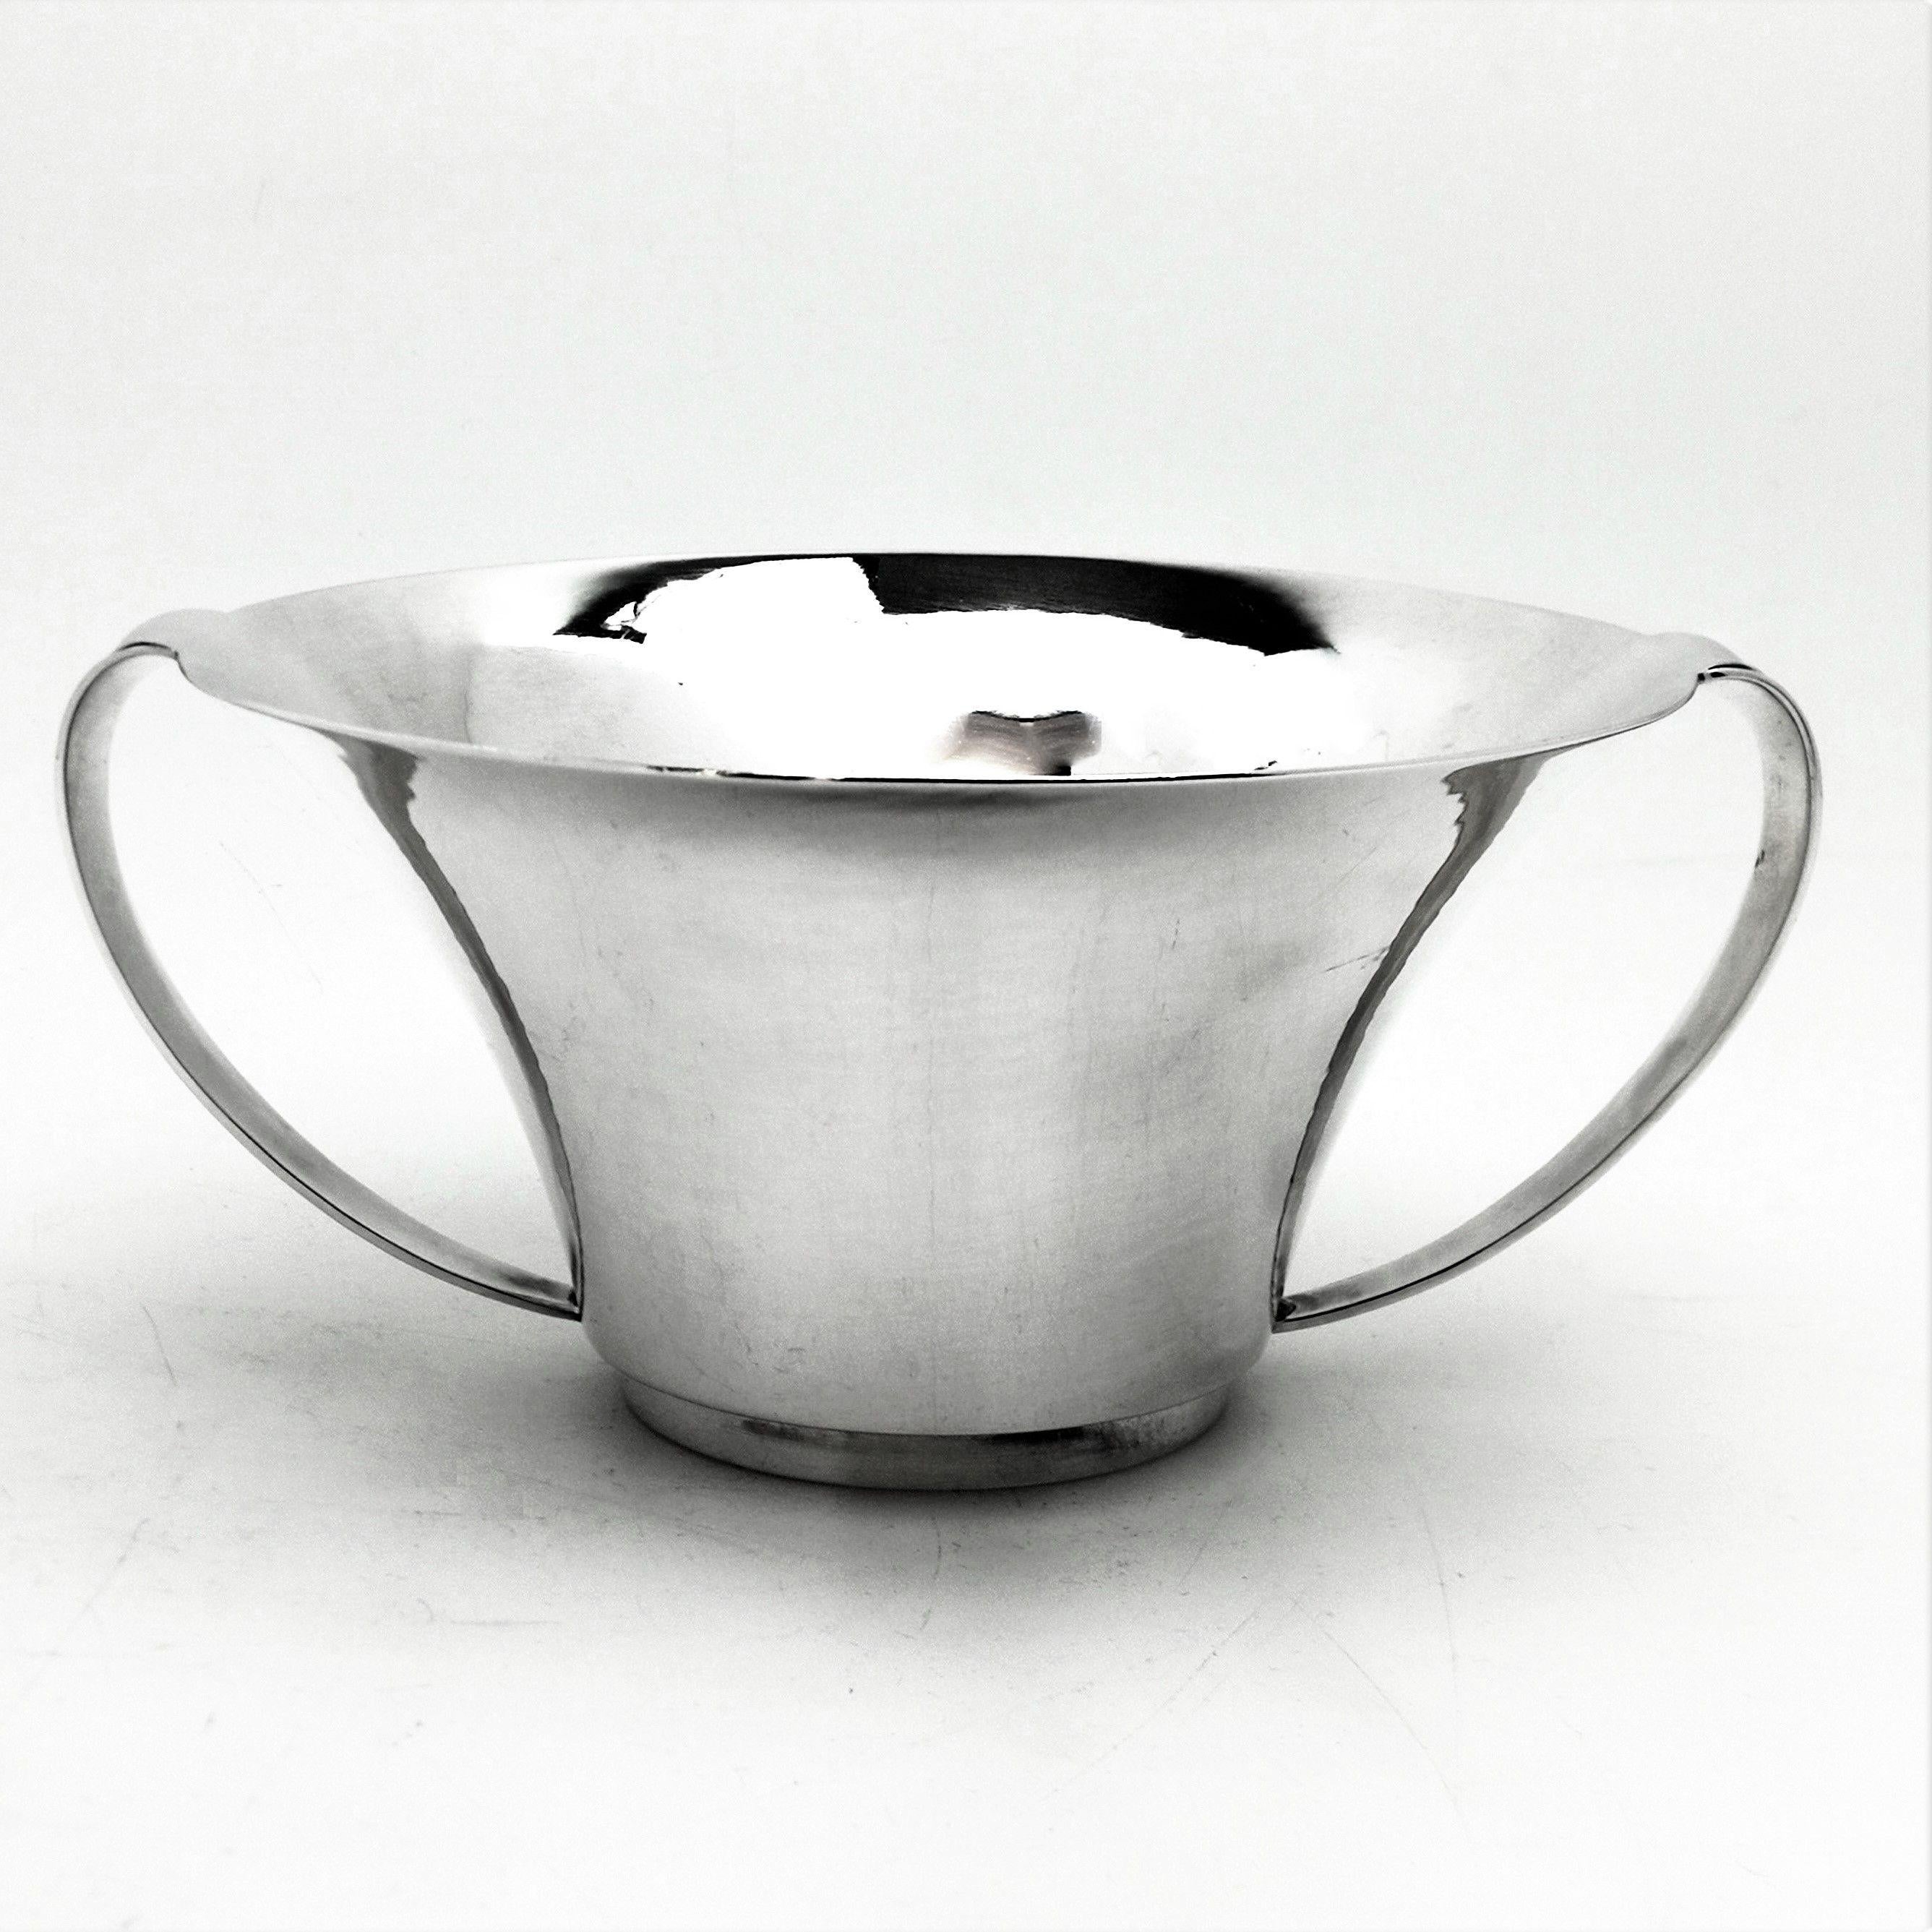 A beautiful Danish Solid Silver two handled Bowl by Georg Jensen. This Silver Bowl has an elegant everted body with a flared lip and a pair of simple curved handles. 
 
 Made in Denmark in circa 1945-1977 by Georg Jensen.
 
 Approx. Weight - 8.9oz /